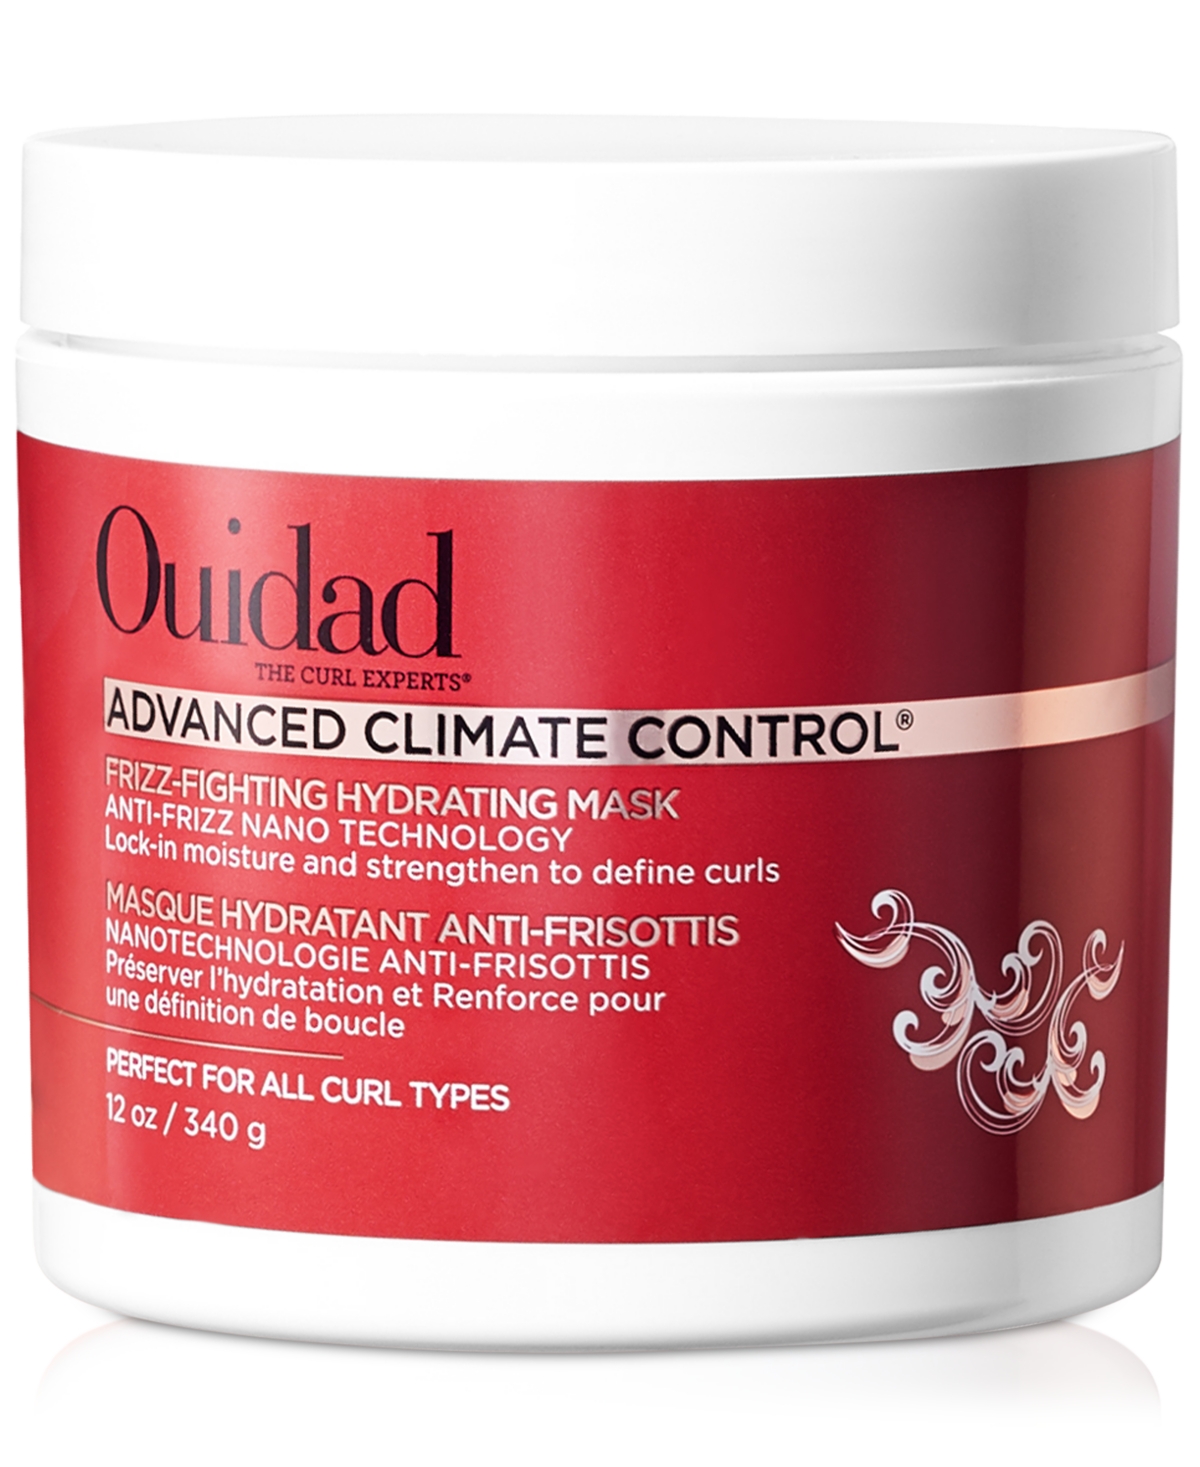 Ouidad Frizz-fighting Hydrating Mask